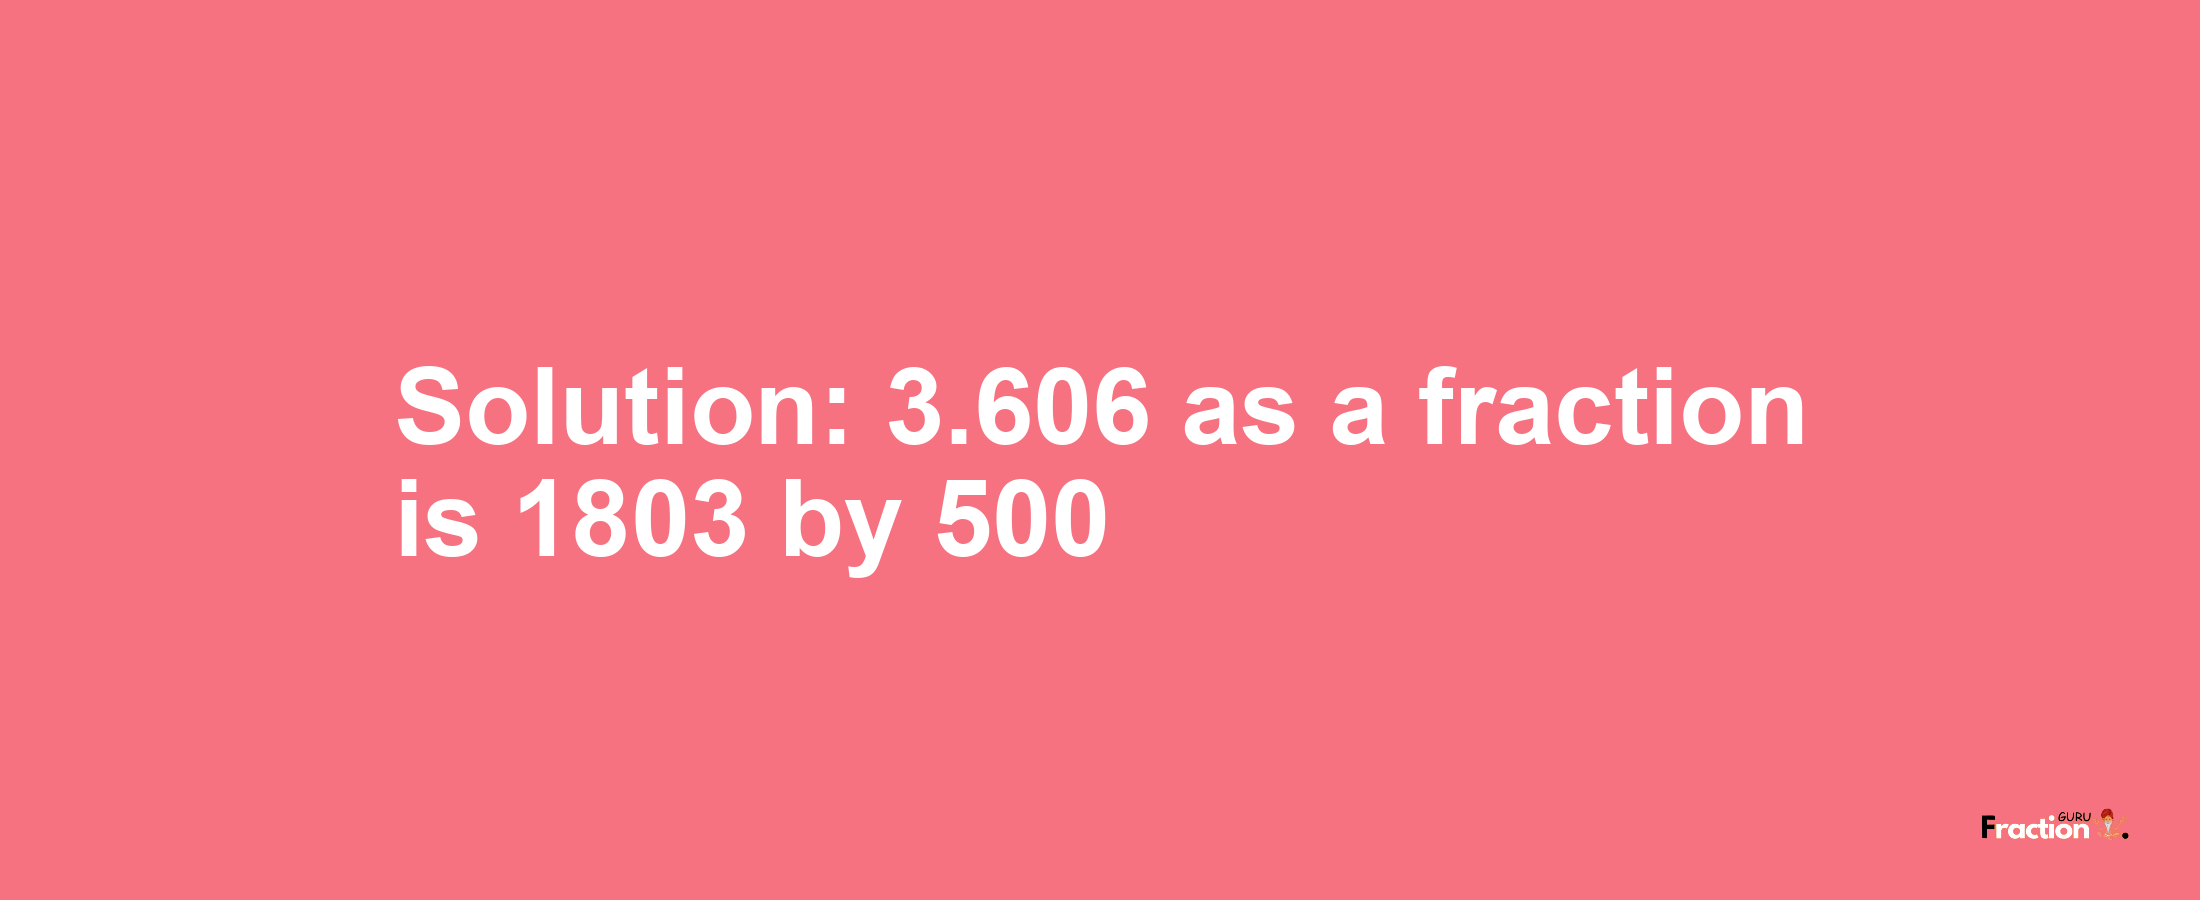 Solution:3.606 as a fraction is 1803/500